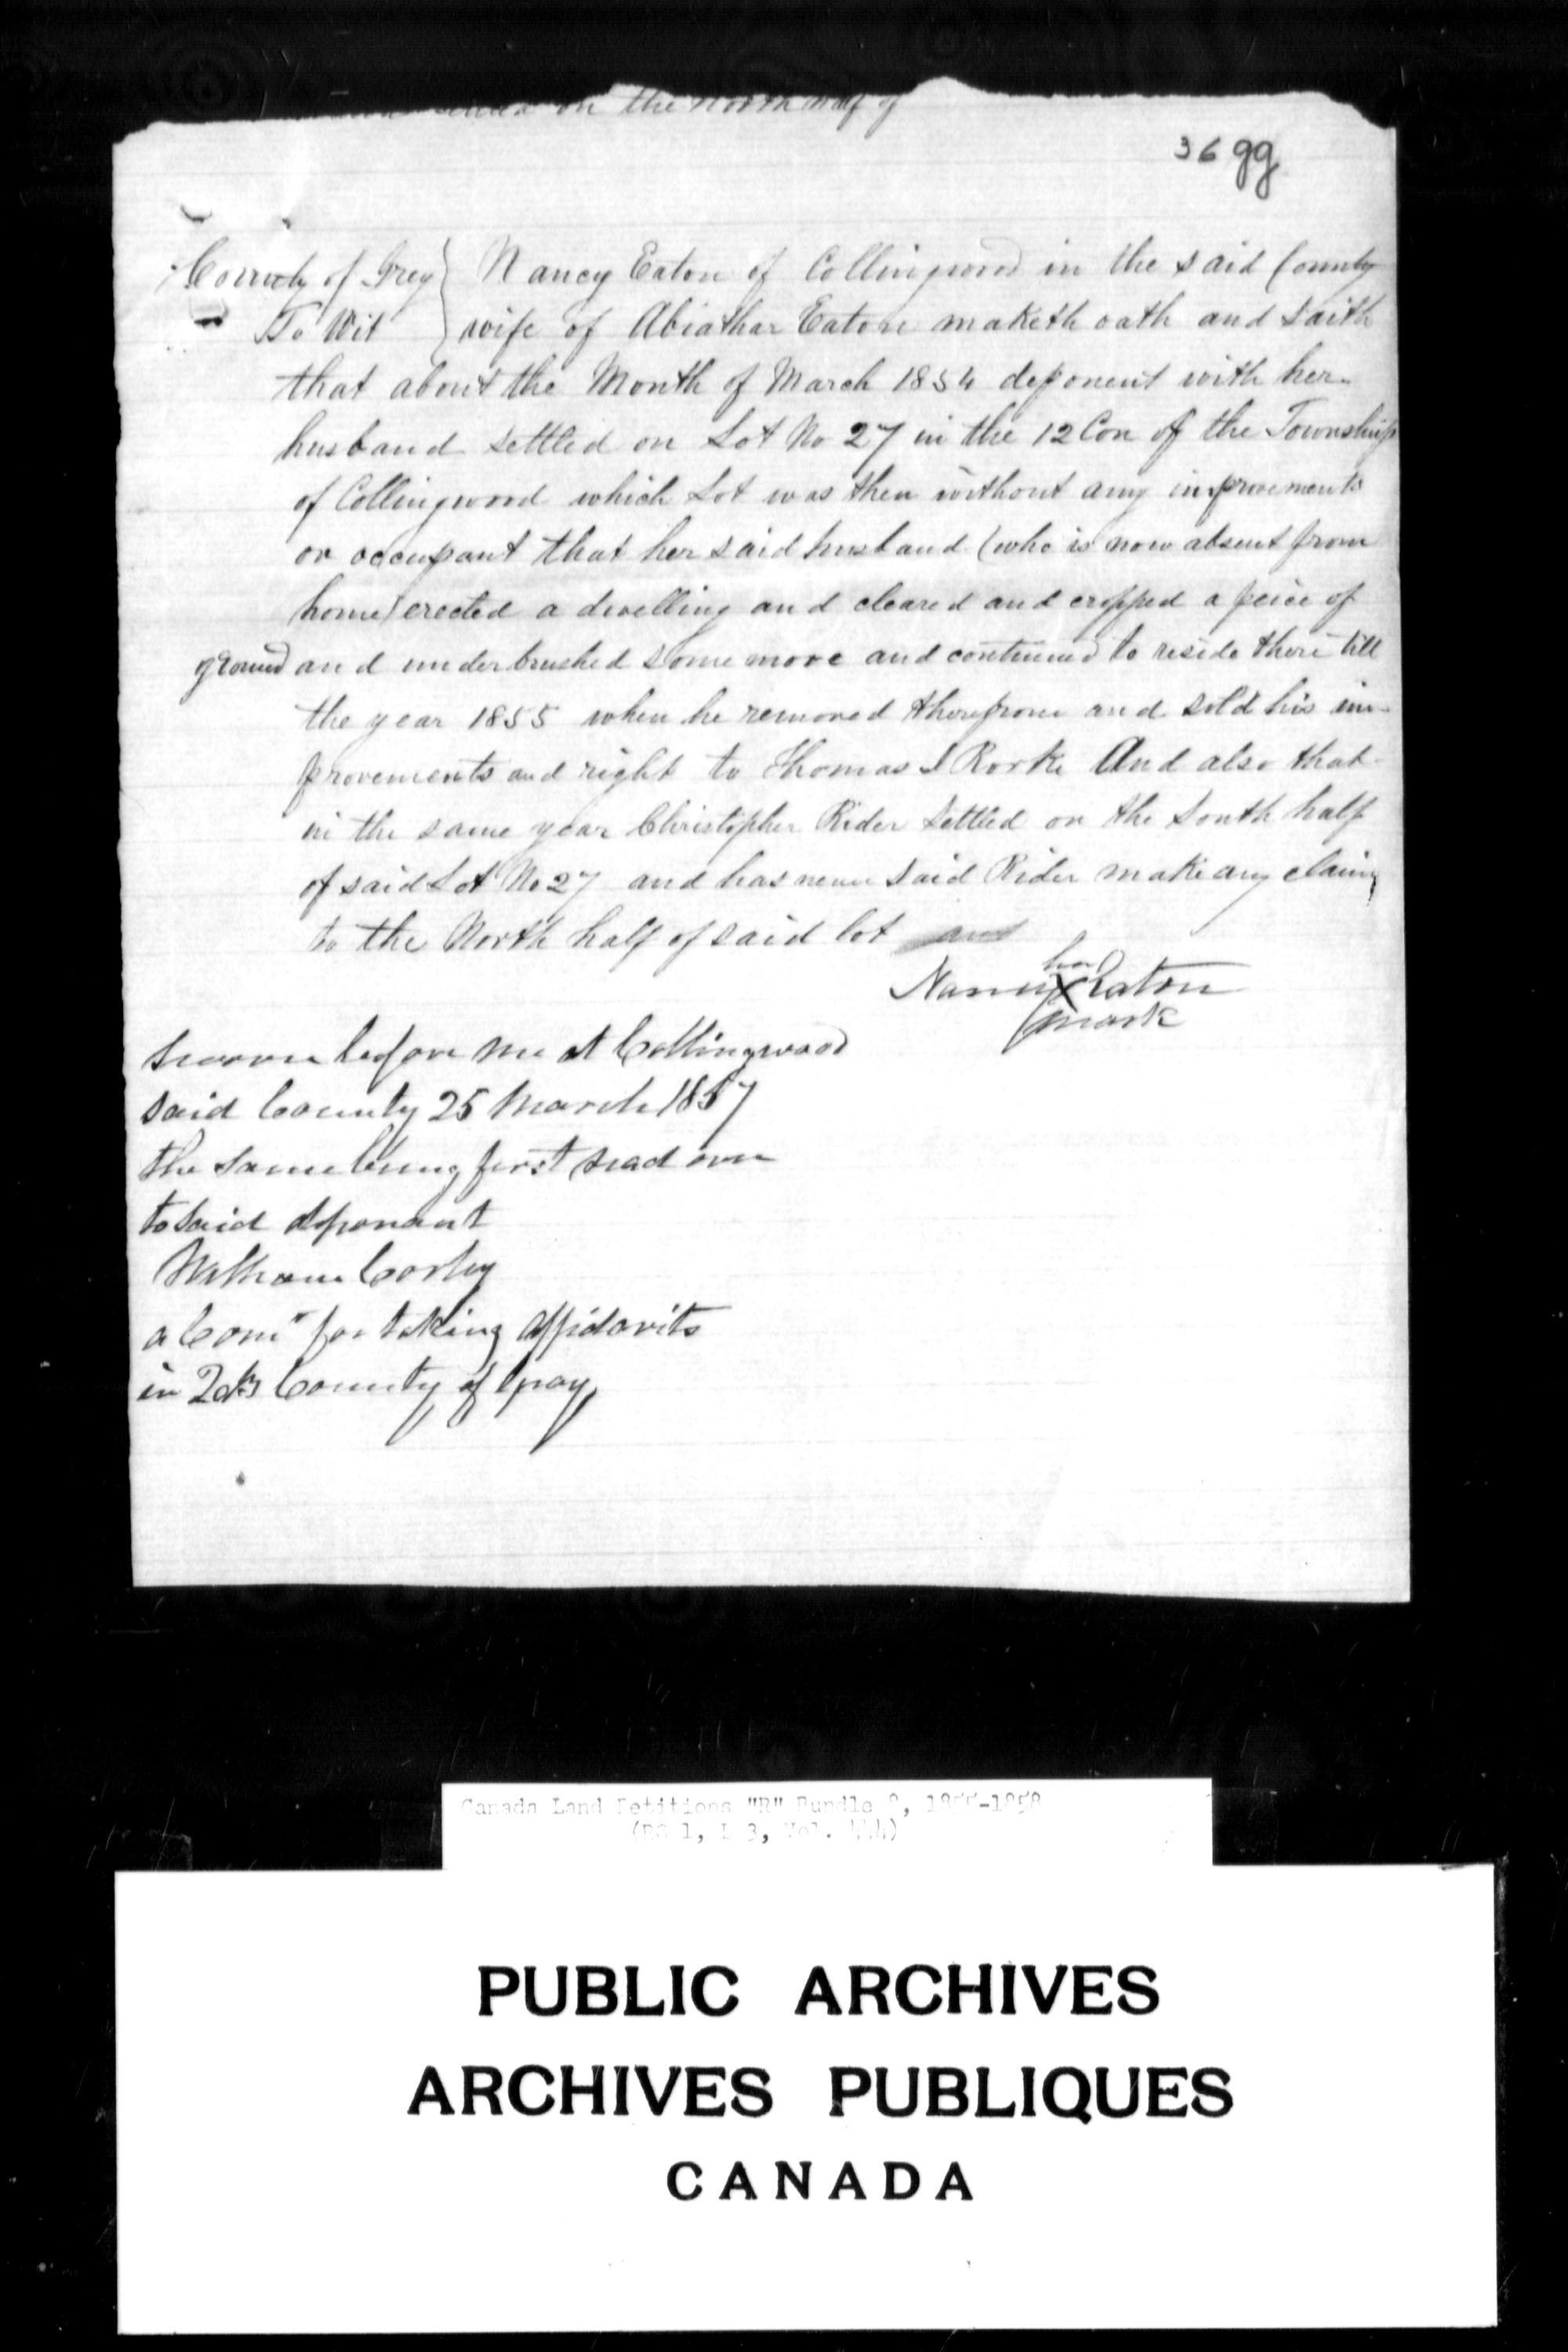 Title: Upper Canada Land Petitions (1763-1865) - Mikan Number: 205131 - Microform: c-2802